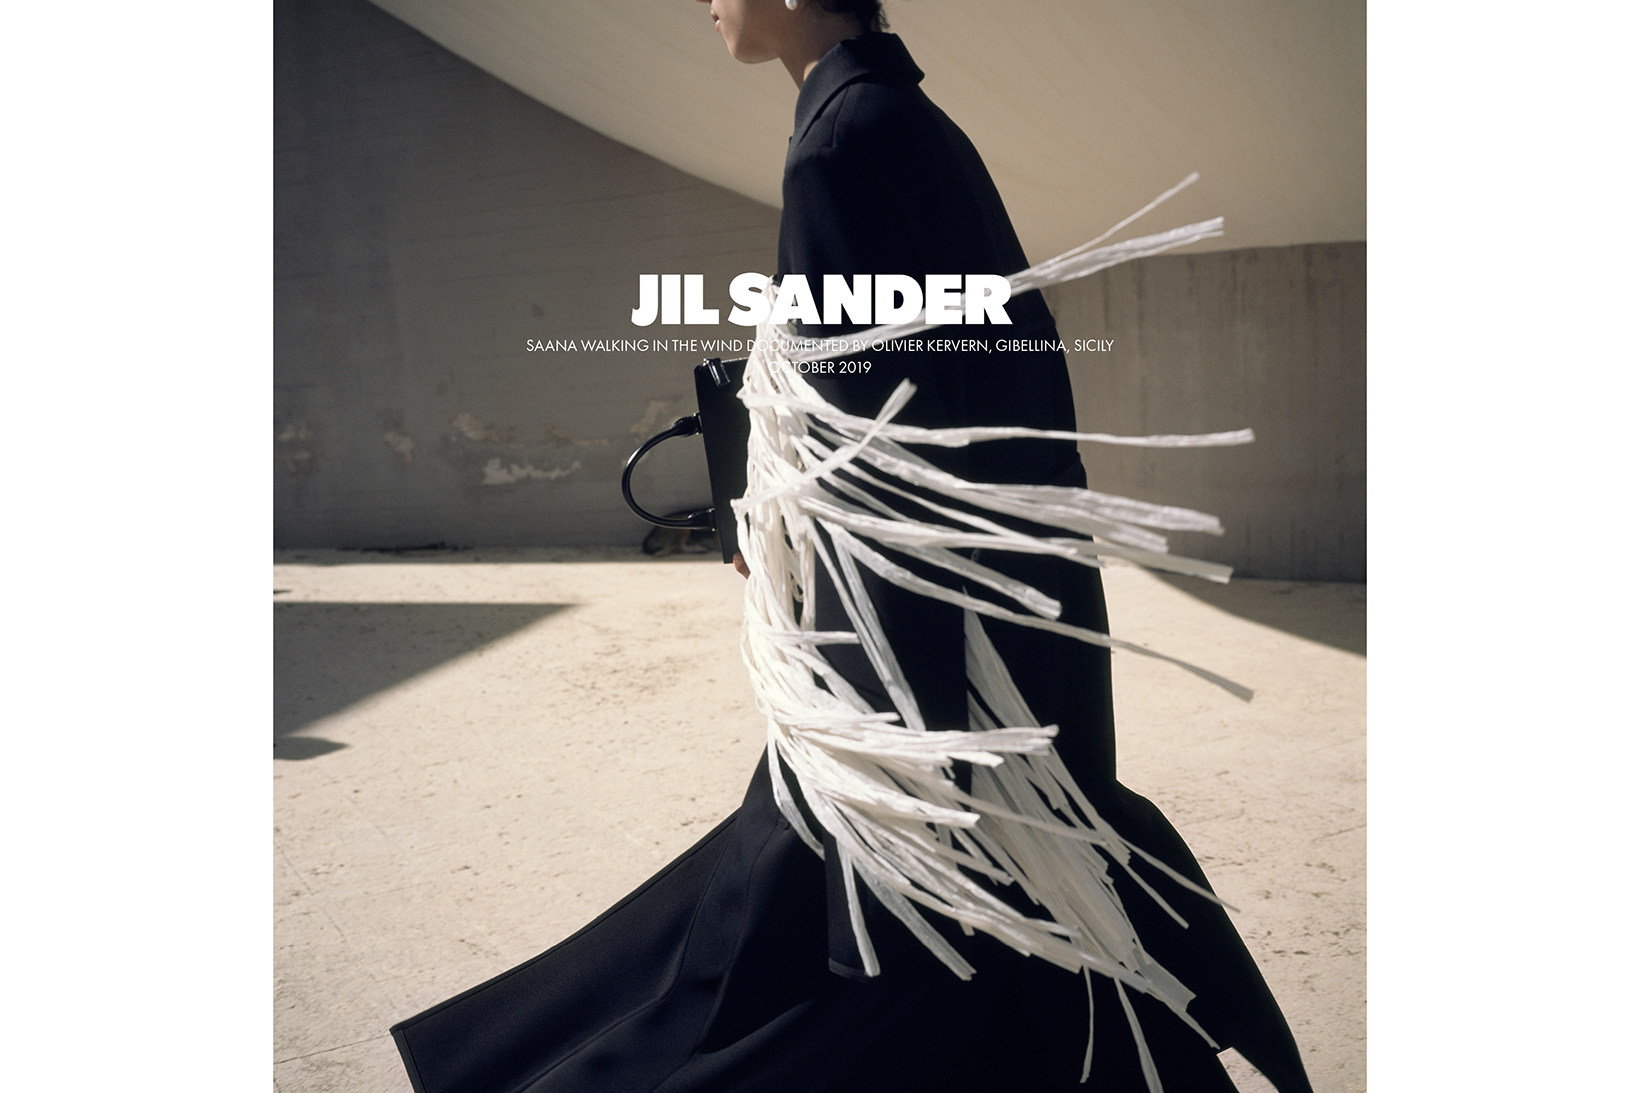 JIL SANDER TRAVELS THROUGH SICILY FOR SS20 CAMPAIGN – W.T. Mag